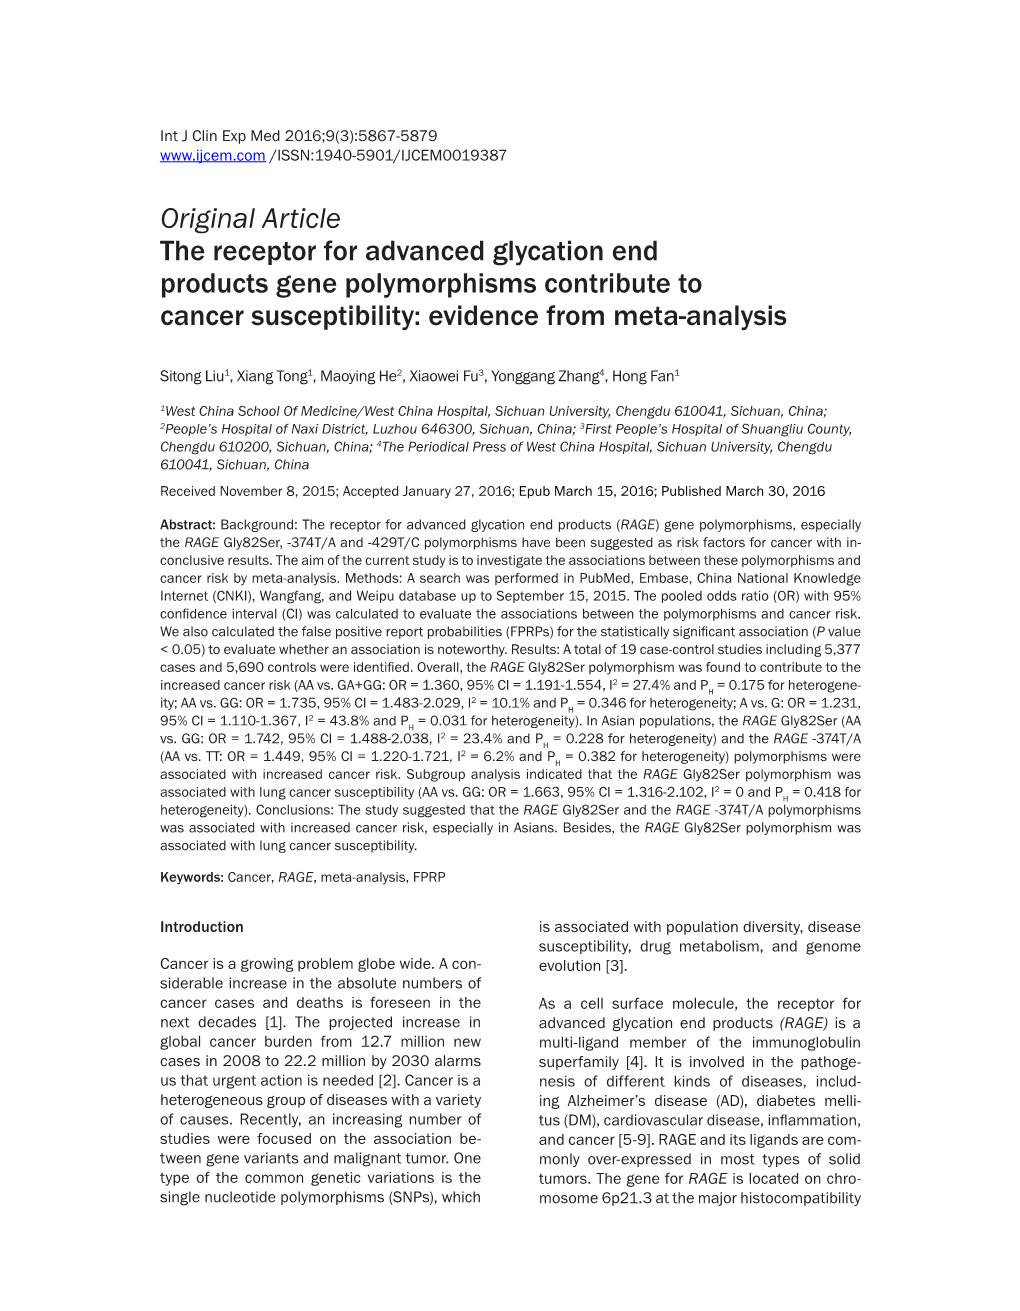 Original Article the Receptor for Advanced Glycation End Products Gene Polymorphisms Contribute to Cancer Susceptibility: Evidence from Meta-Analysis